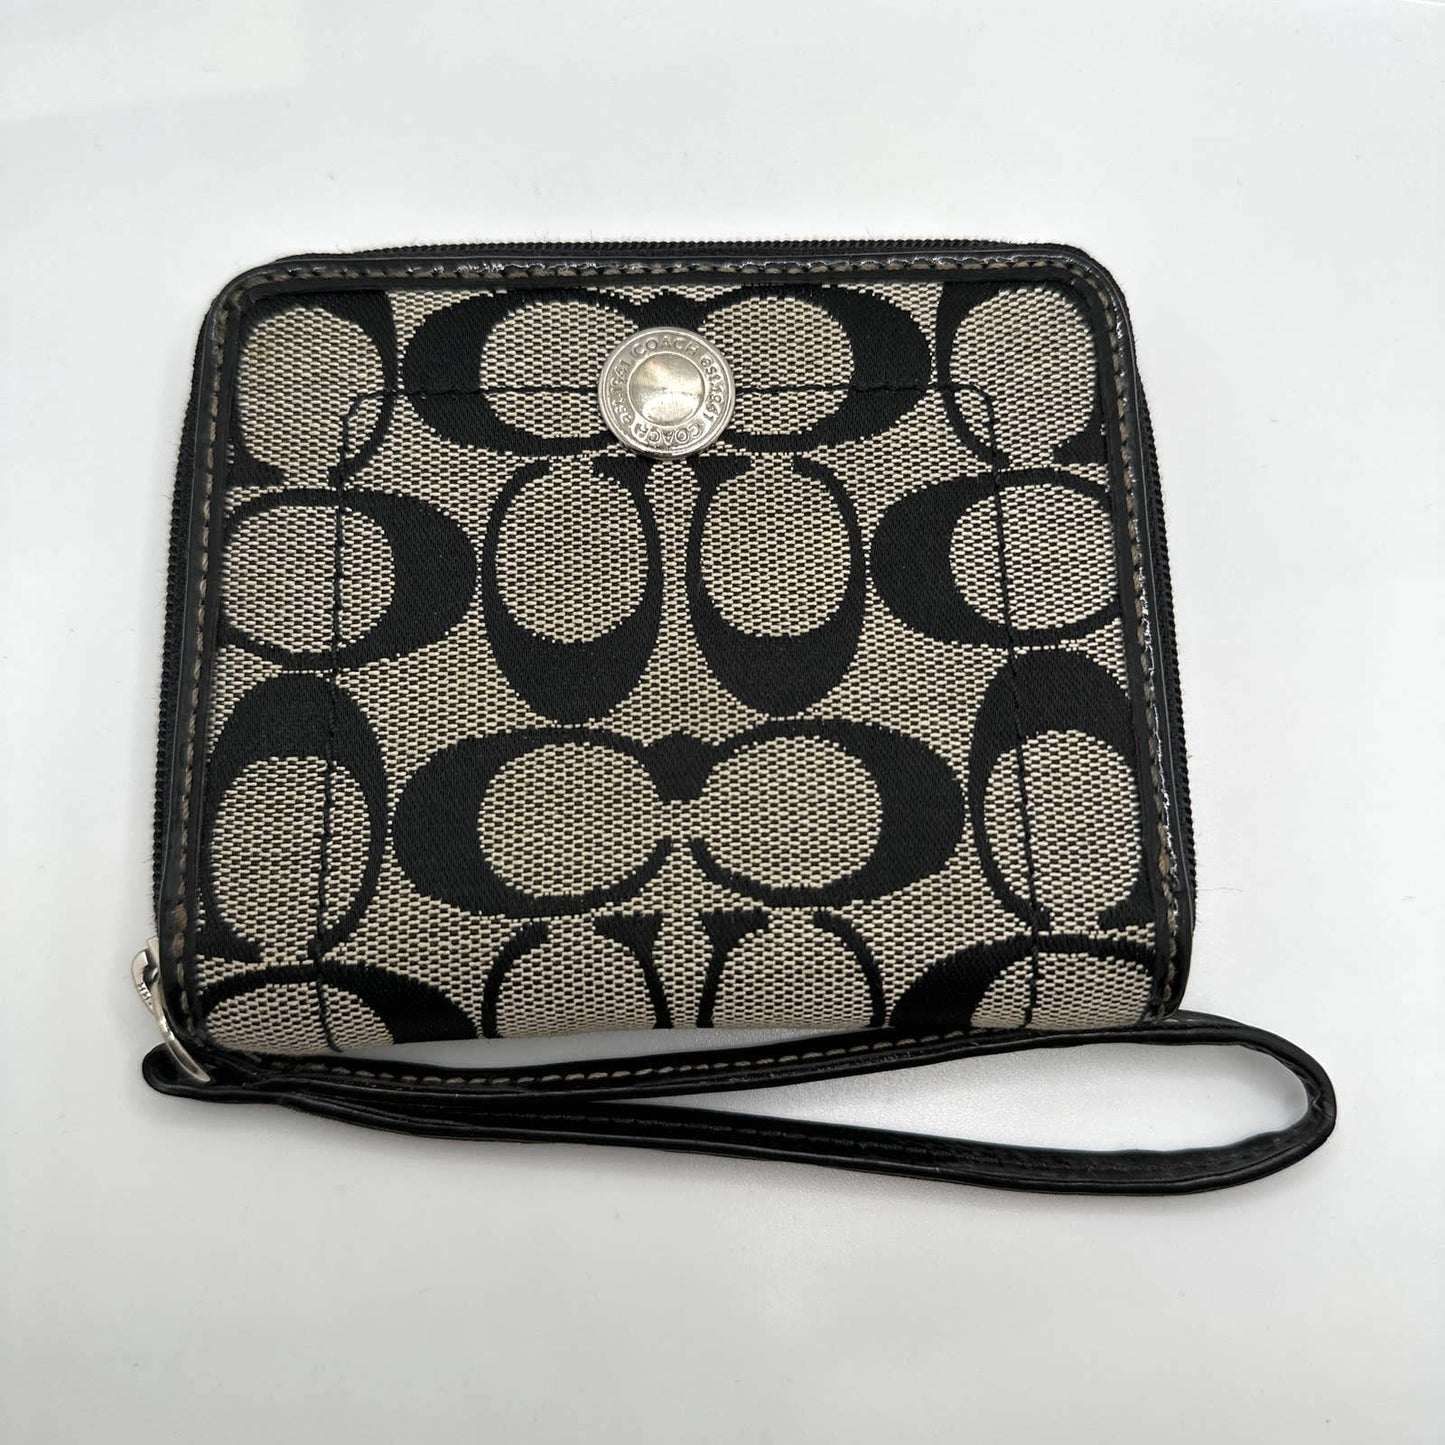 COACH Black and Gray Signature Canvas Wallet